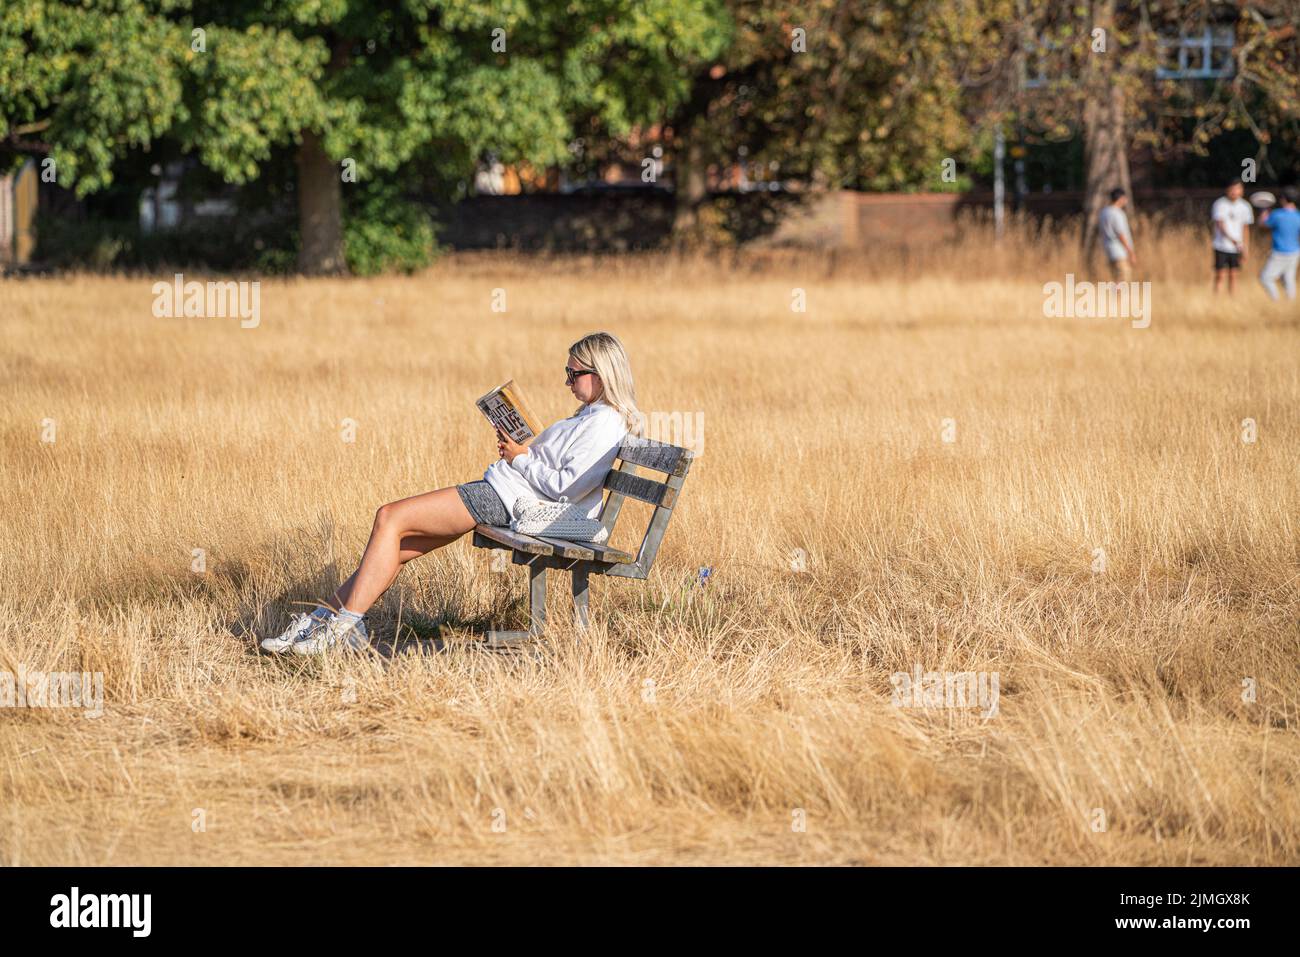 Wimbledon, London, UK. 6 August 2022  A woman  relaxing on a bench with a book in the afternoon sunshine on the parched  grass of Wimbledon Common  as the hot weather and a lack of rainfall continue to grip much of the south of England and the UK, with temperatures expected to reach  above 30celsius  by next week Credit. amer ghazzal/Alamy Live News Stock Photo